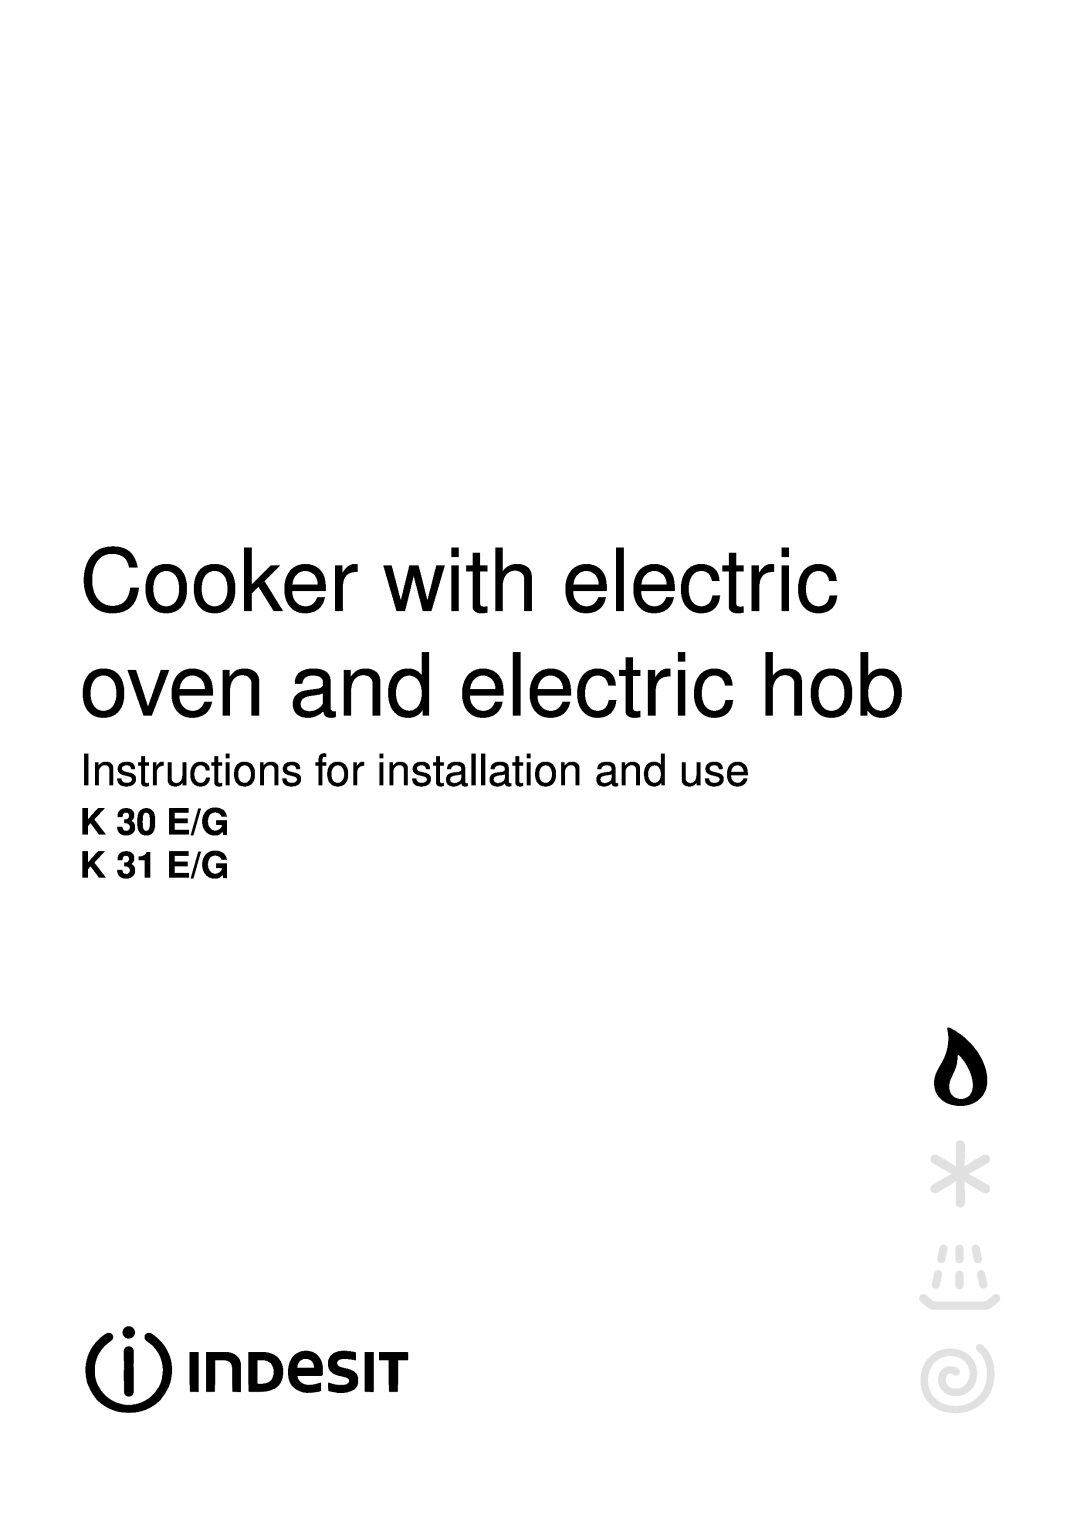 Indesit K 30 E/G, K 31 E/G manual Cooker with electric oven and electric hob, Instructions for installation and use 